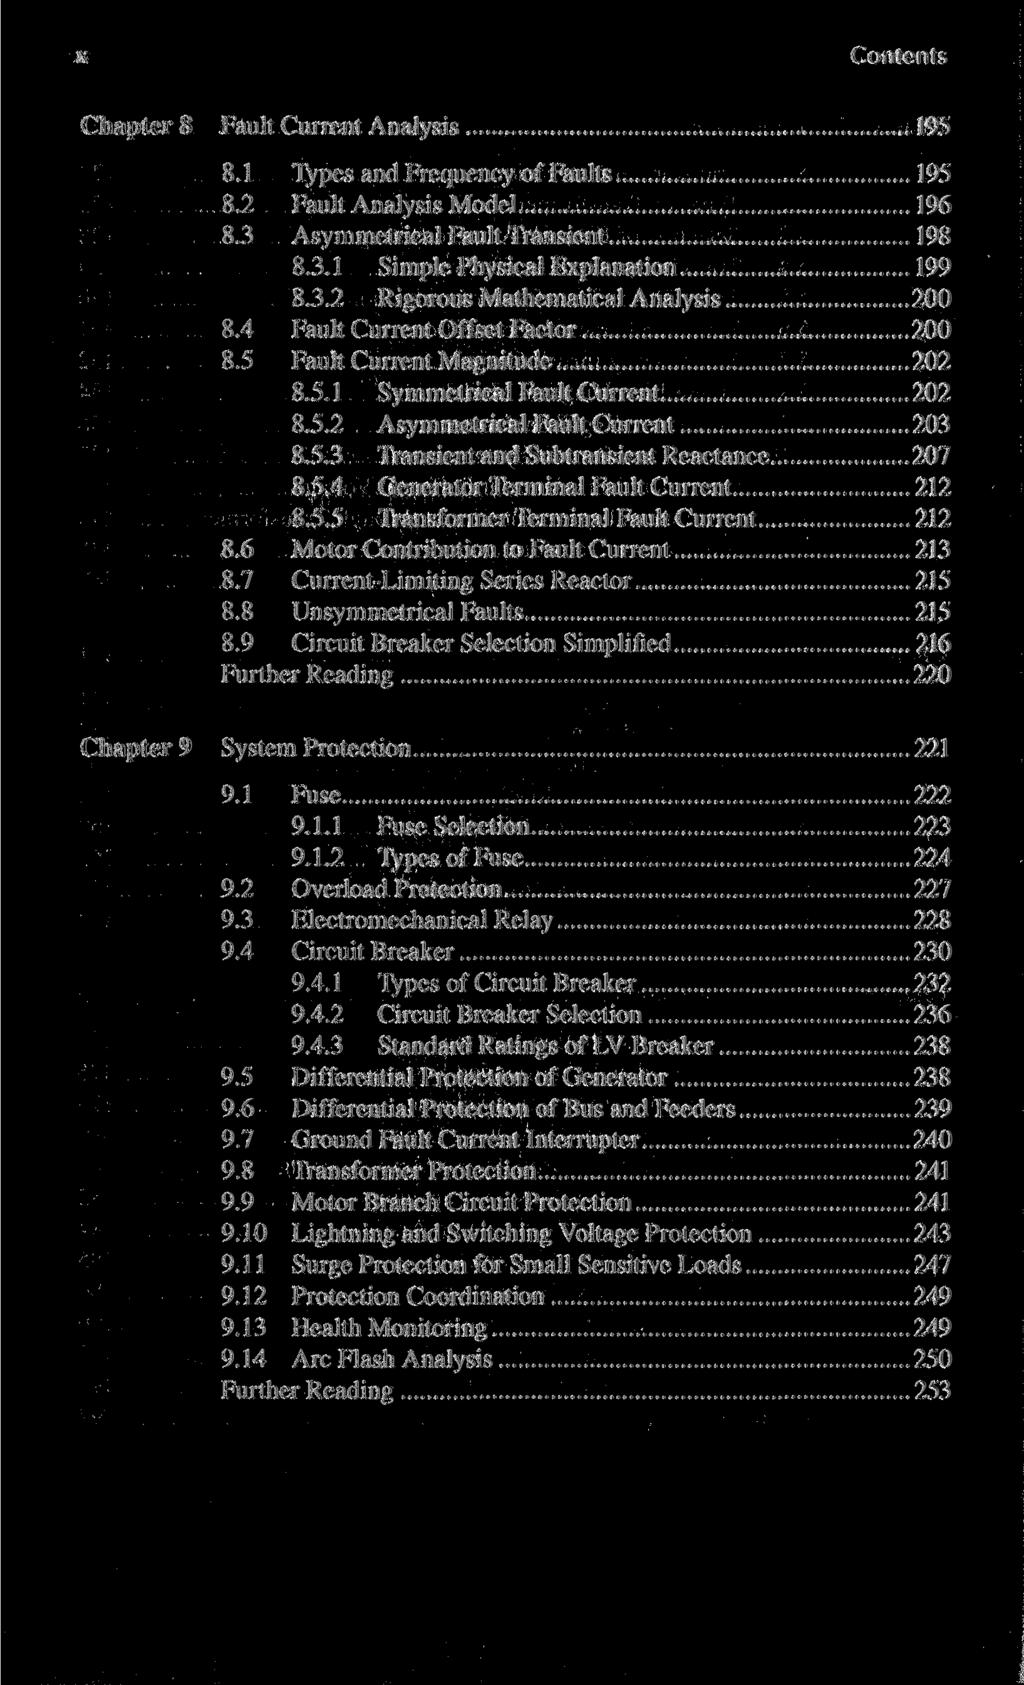 x Contents Chapter 8 Fault Current Analysis 195 8.1 Types and Frequency of Faults 195 8.2 Fault Analysis Model 196 8.3 Asymmetrical Fault Transient 198 8.3.1 Simple Physical Explanation 199 8.3.2 Rigorous Mathematical Analysis 200 8.